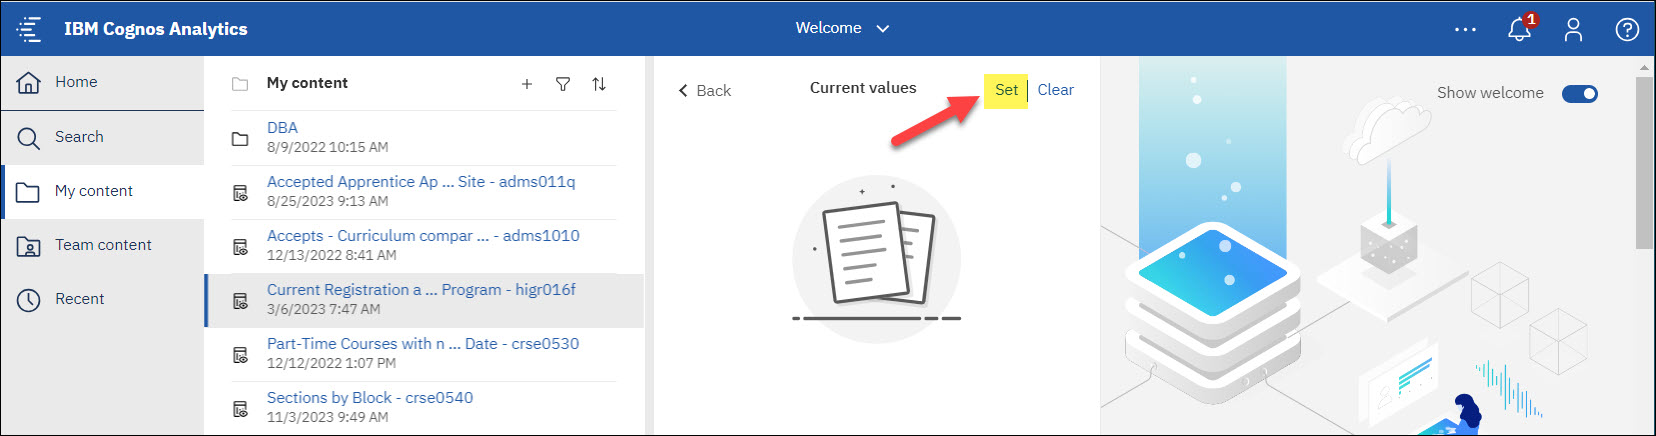 Screenshot Cognos Setting Report values and clicking on Set button